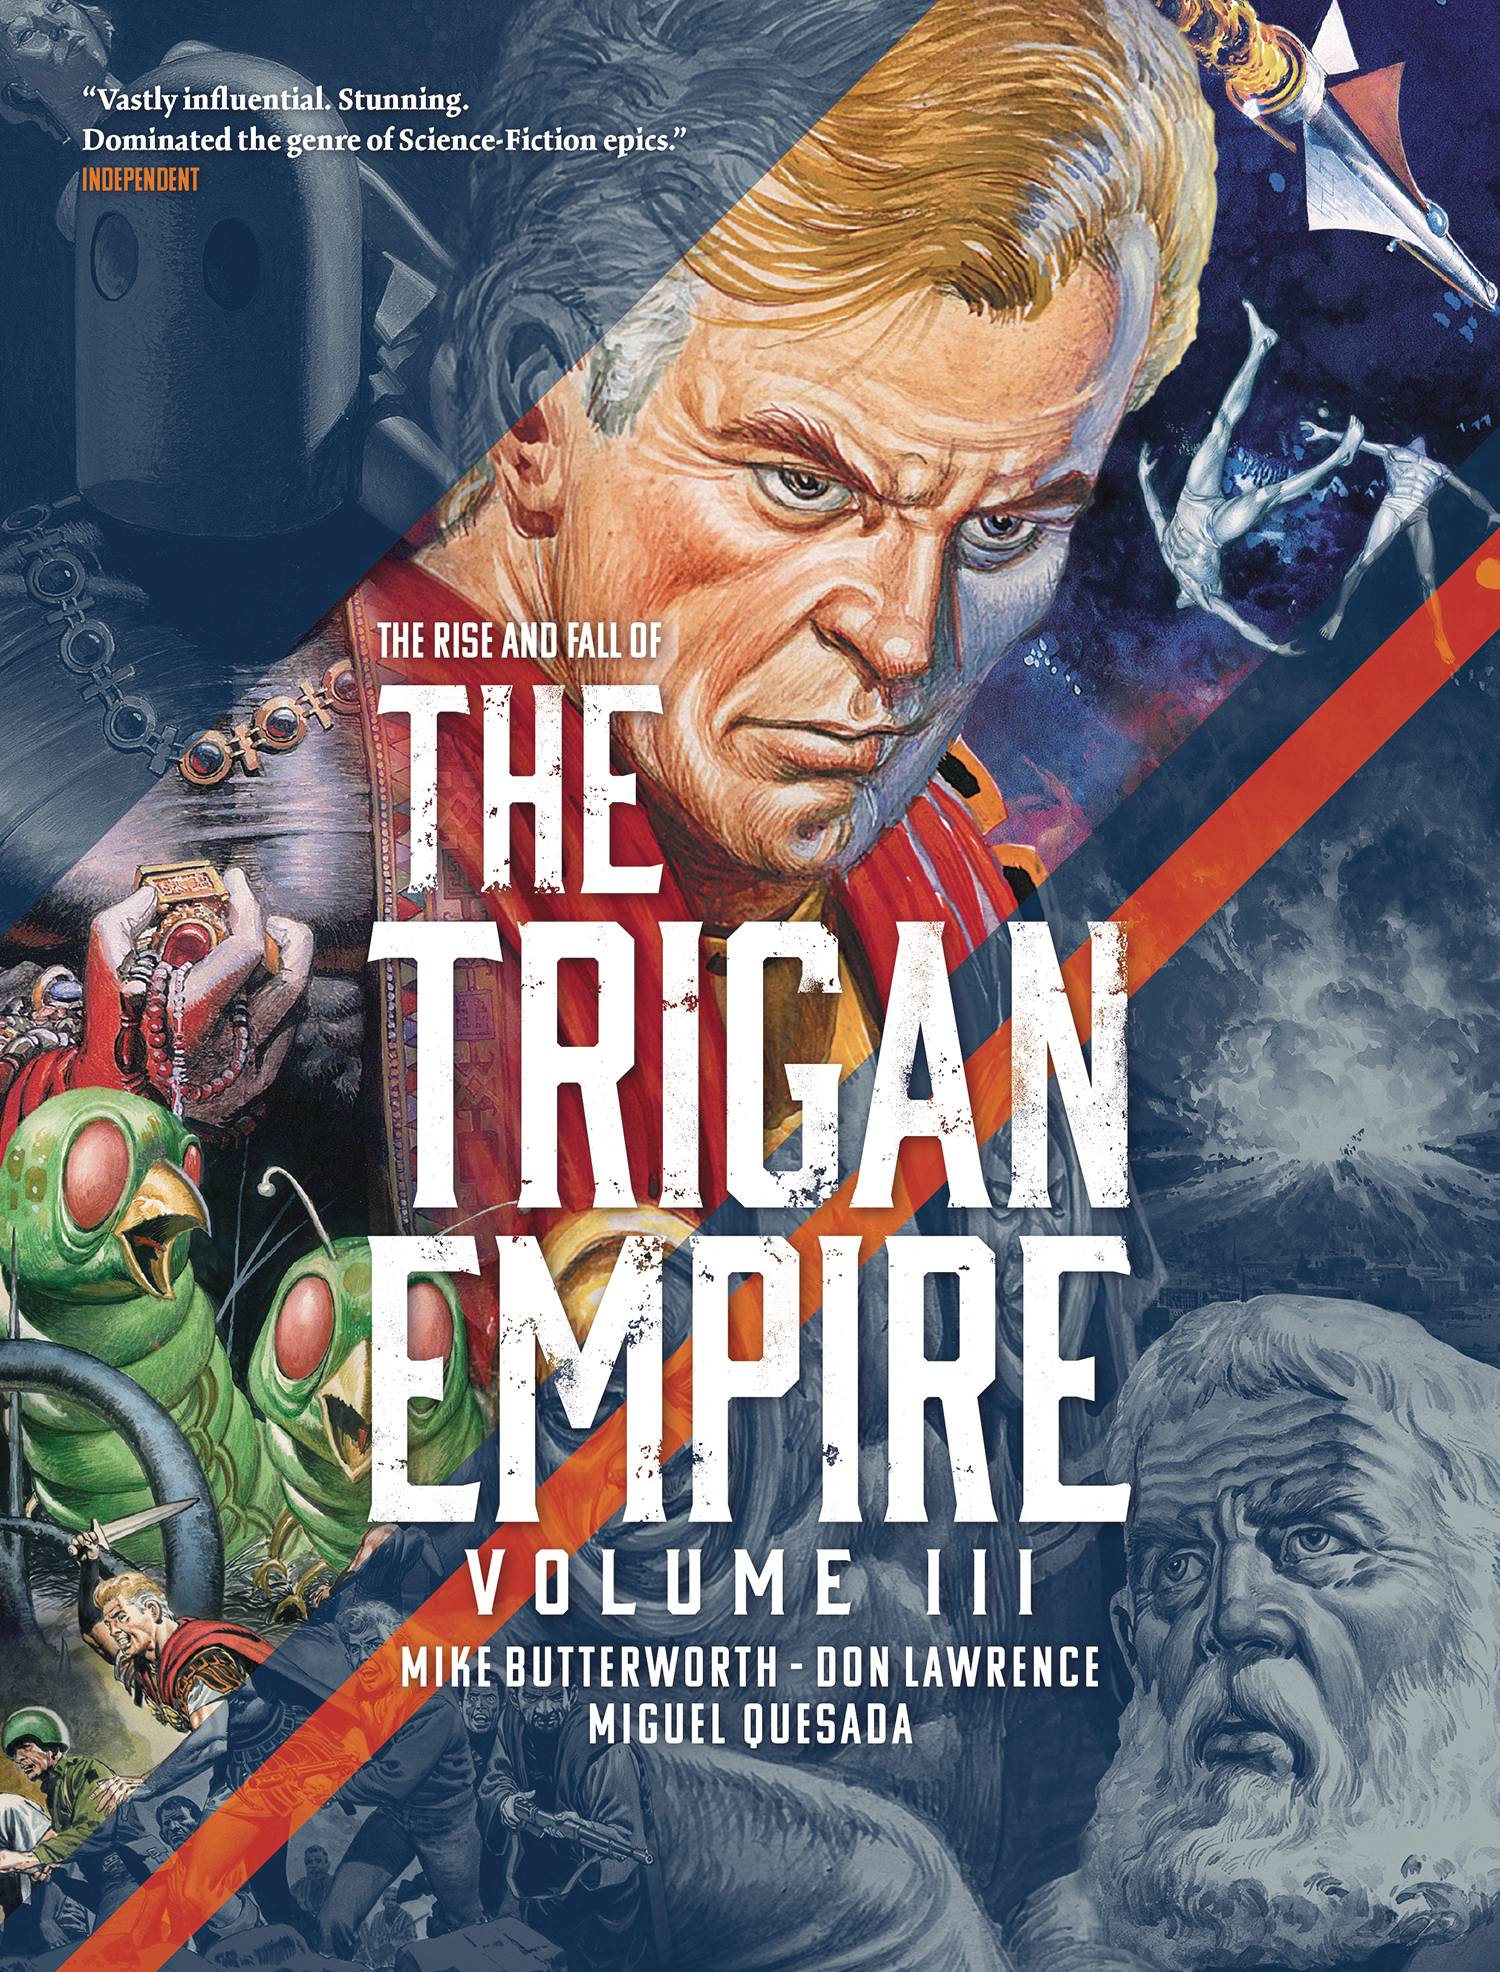 The Rise And Fall Of The Trigan Empire vol 3